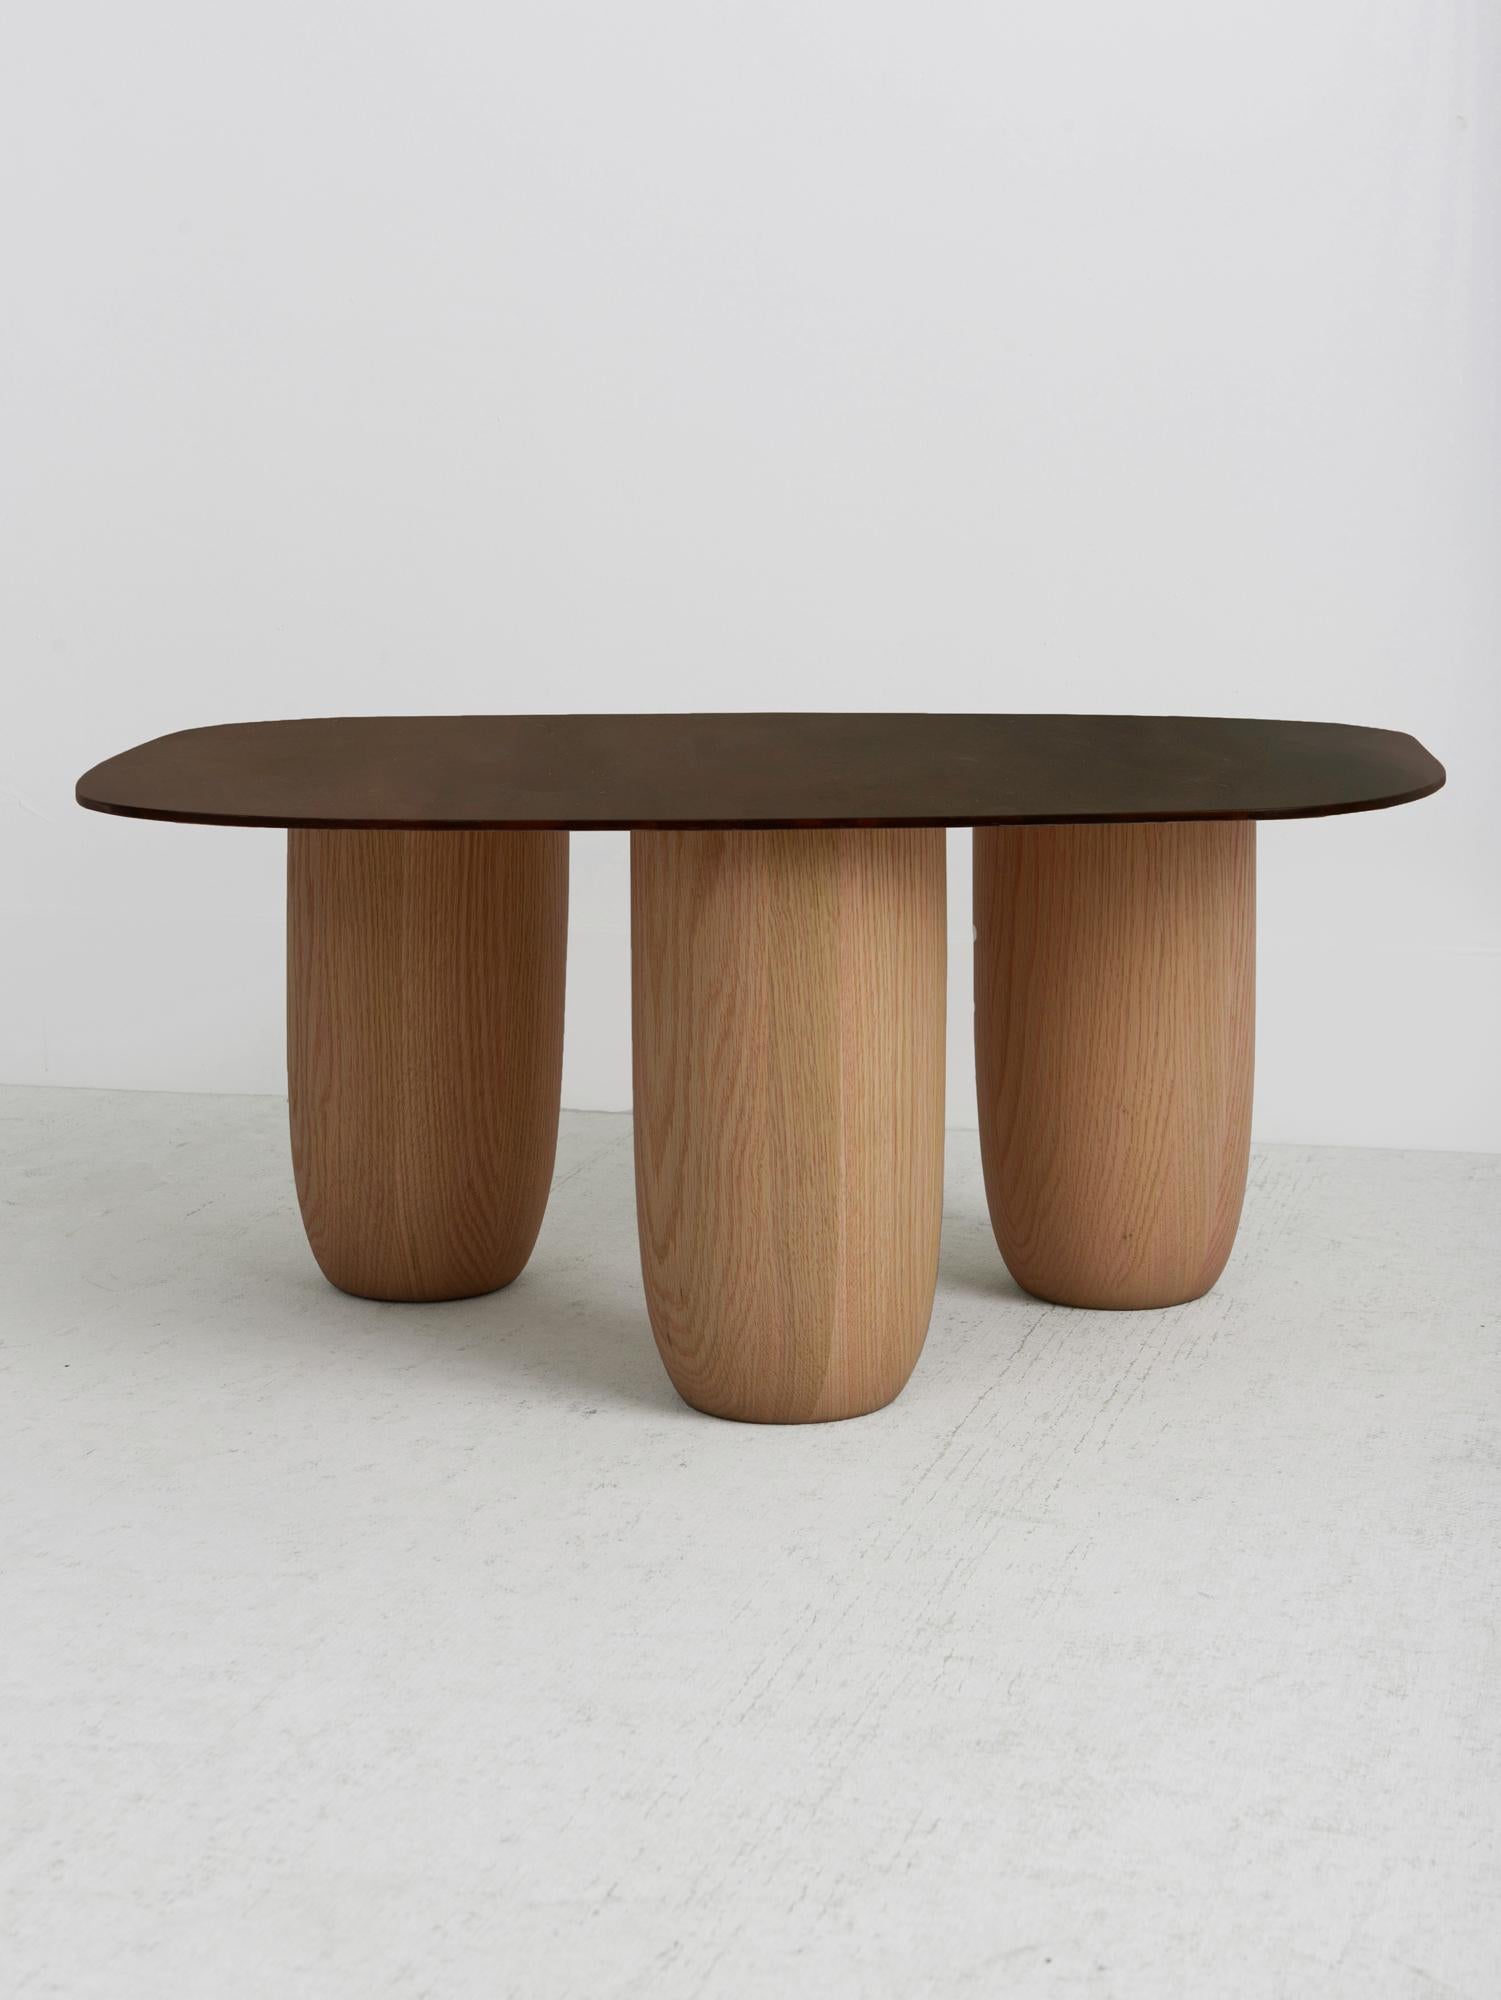 Minimalist Low Tables Japanese Brown Patina Steel with Oak Legs Vivian Carbonell For Sale 2